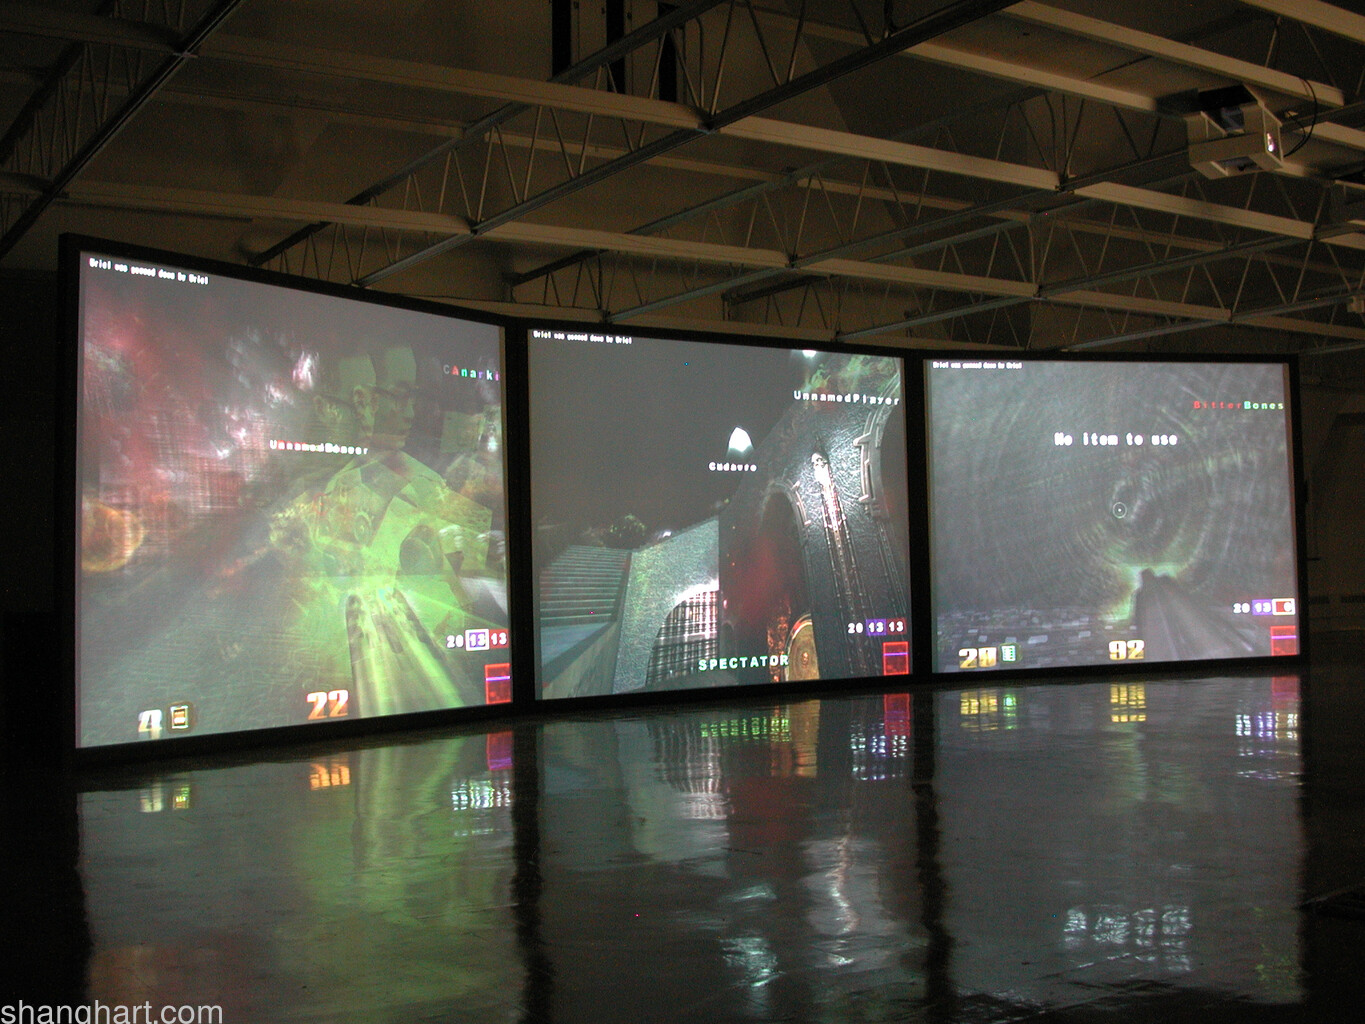 installation view of the work